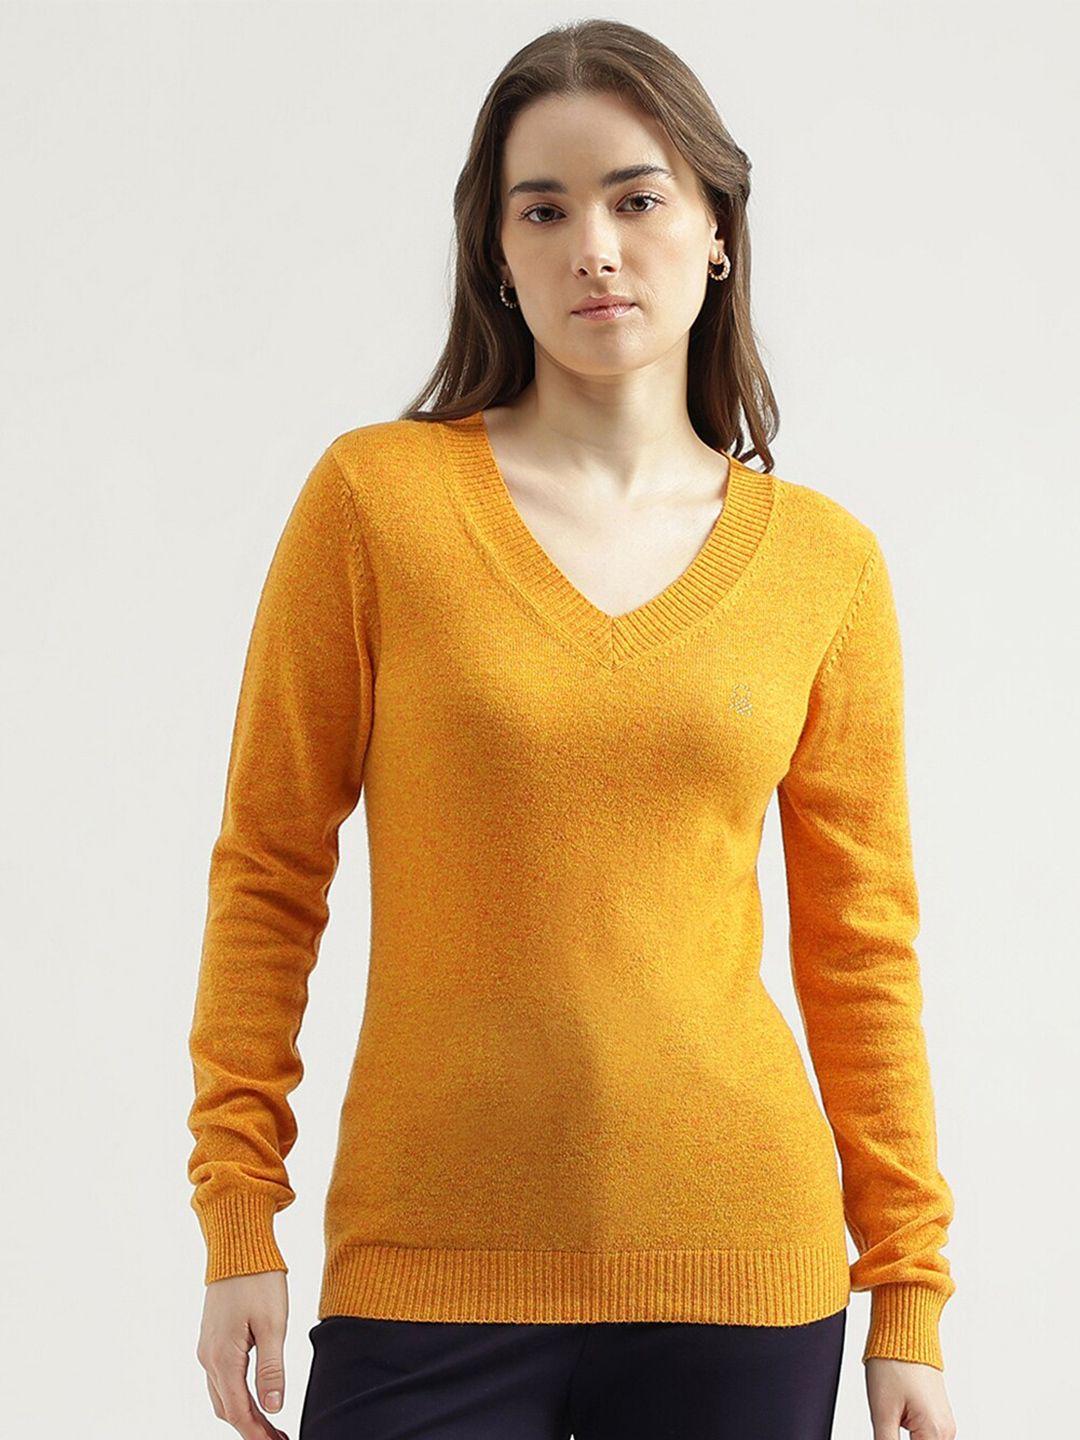 united-colors-of-benetton-v-neck-long-sleeves-pullover-sweater